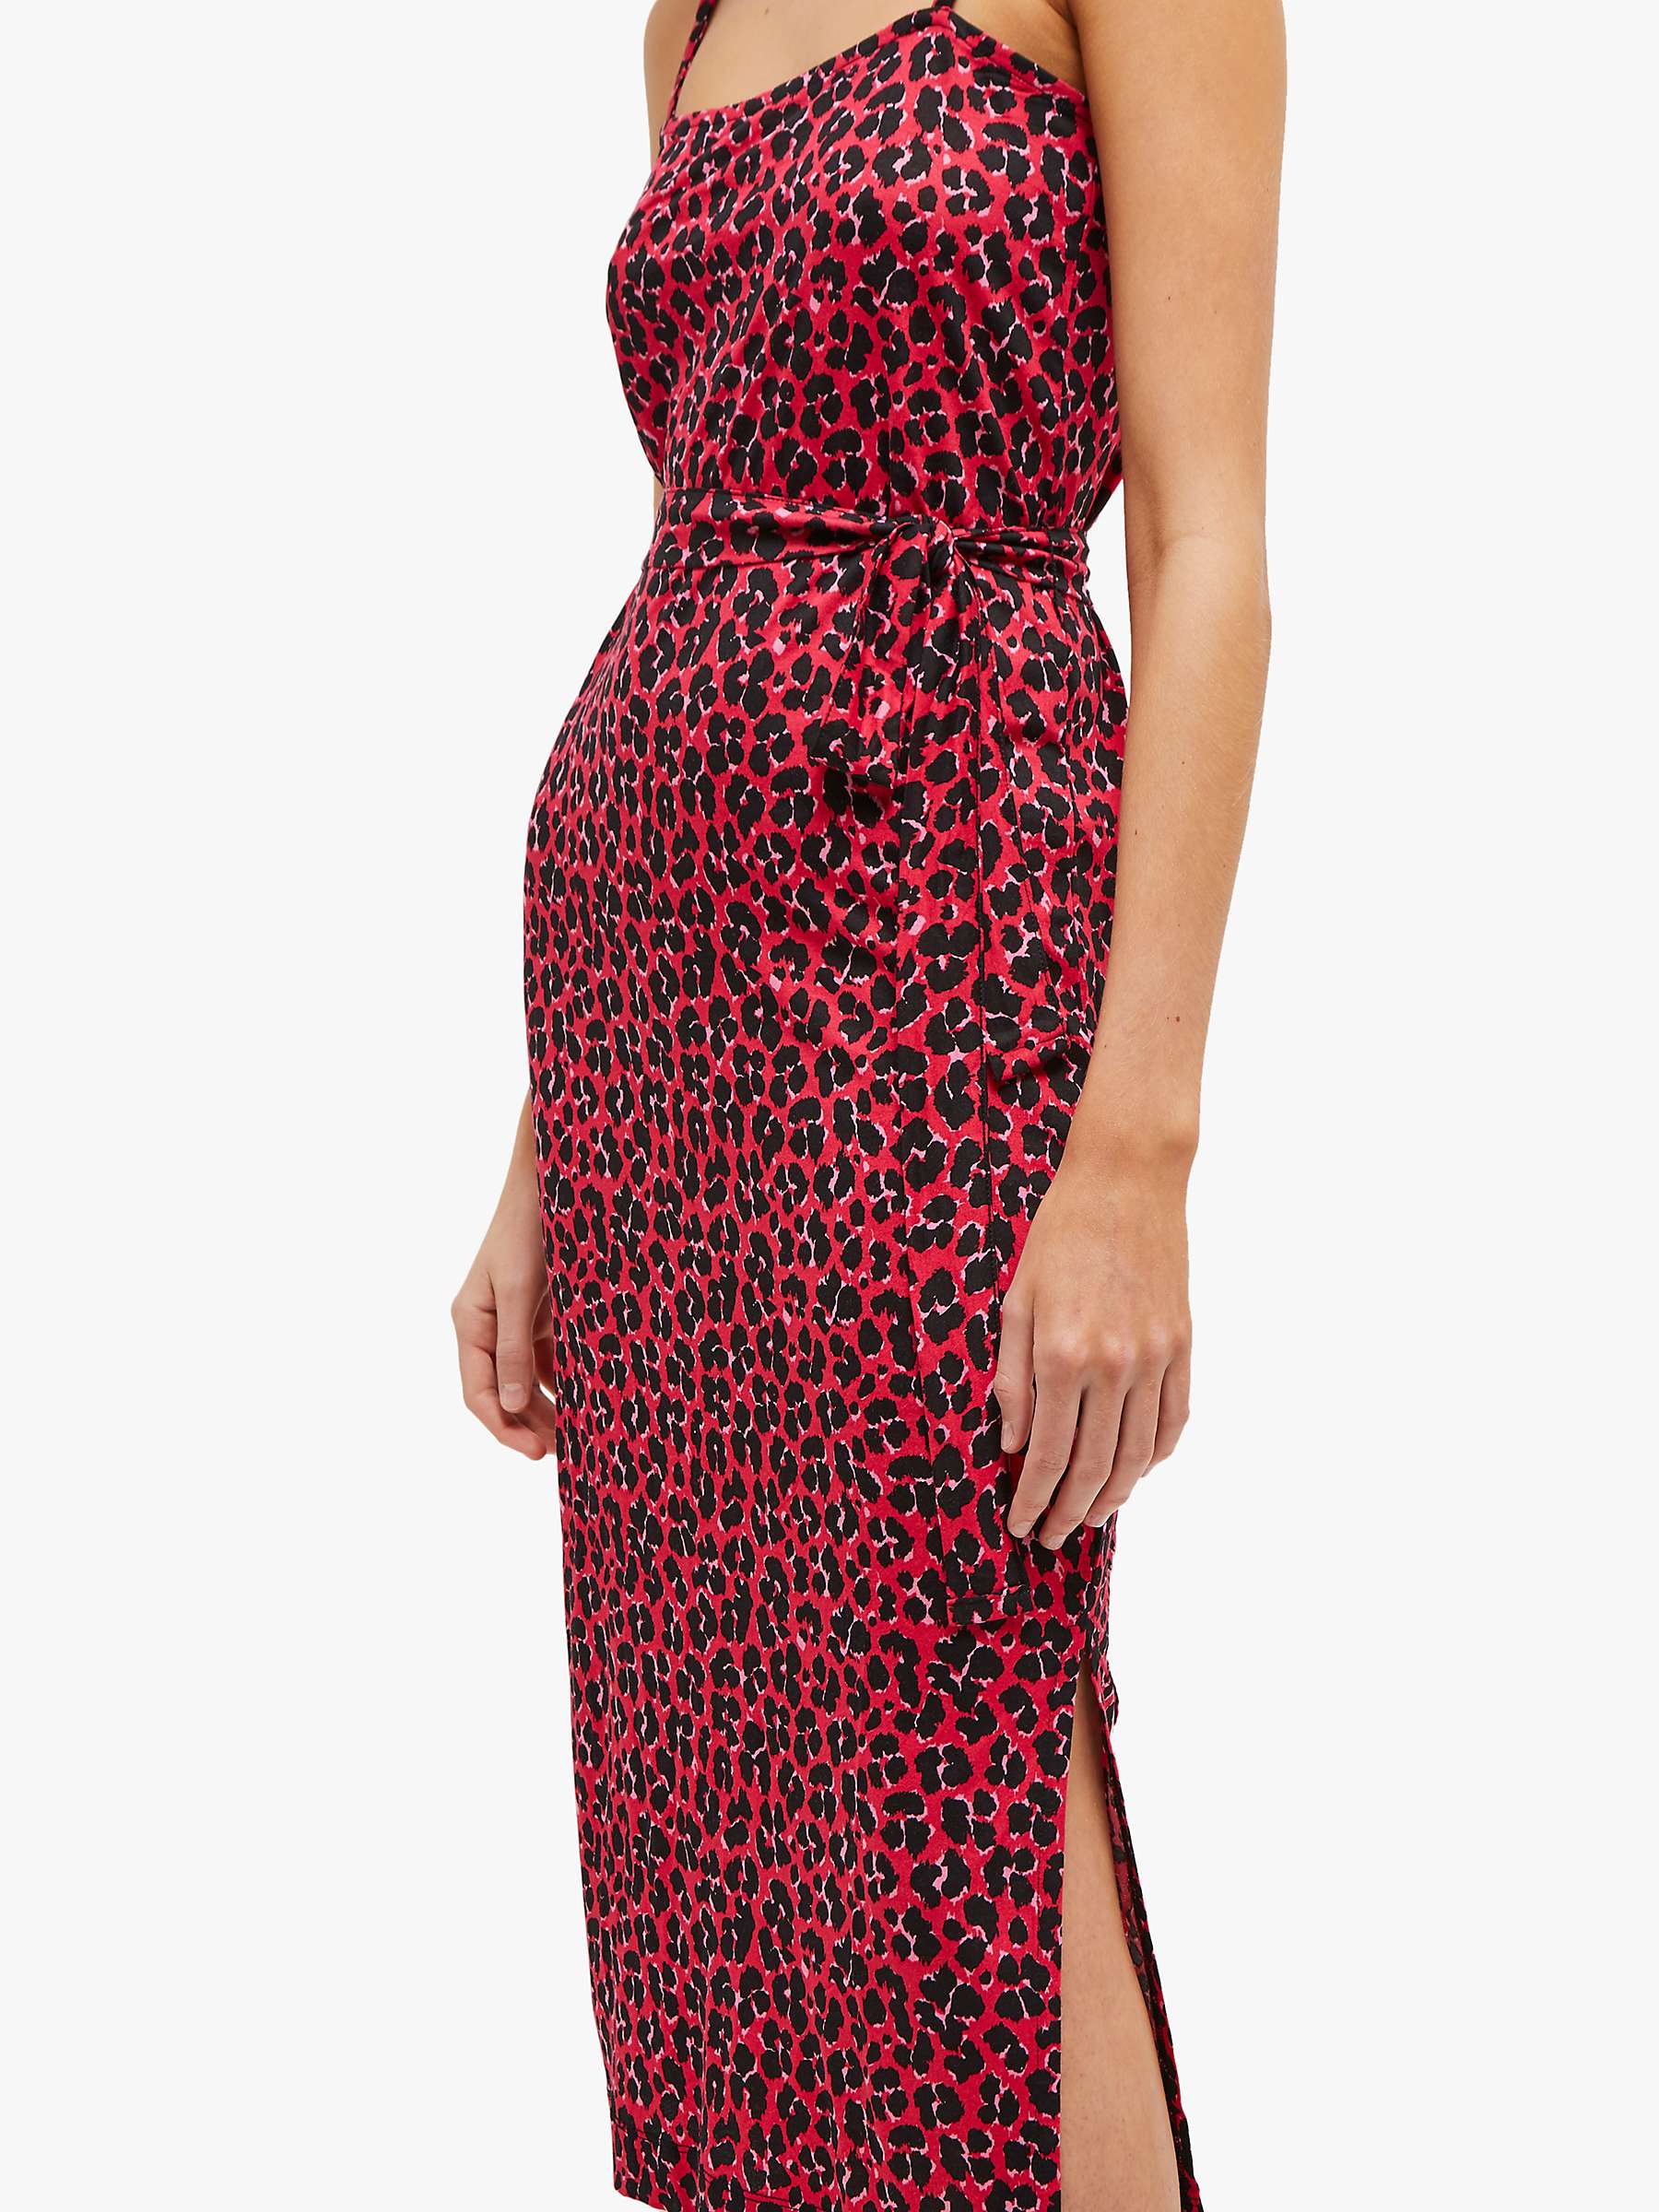 Buy French Connection Anna Jersey Leopard Print Dress, Red Online at johnlewis.com